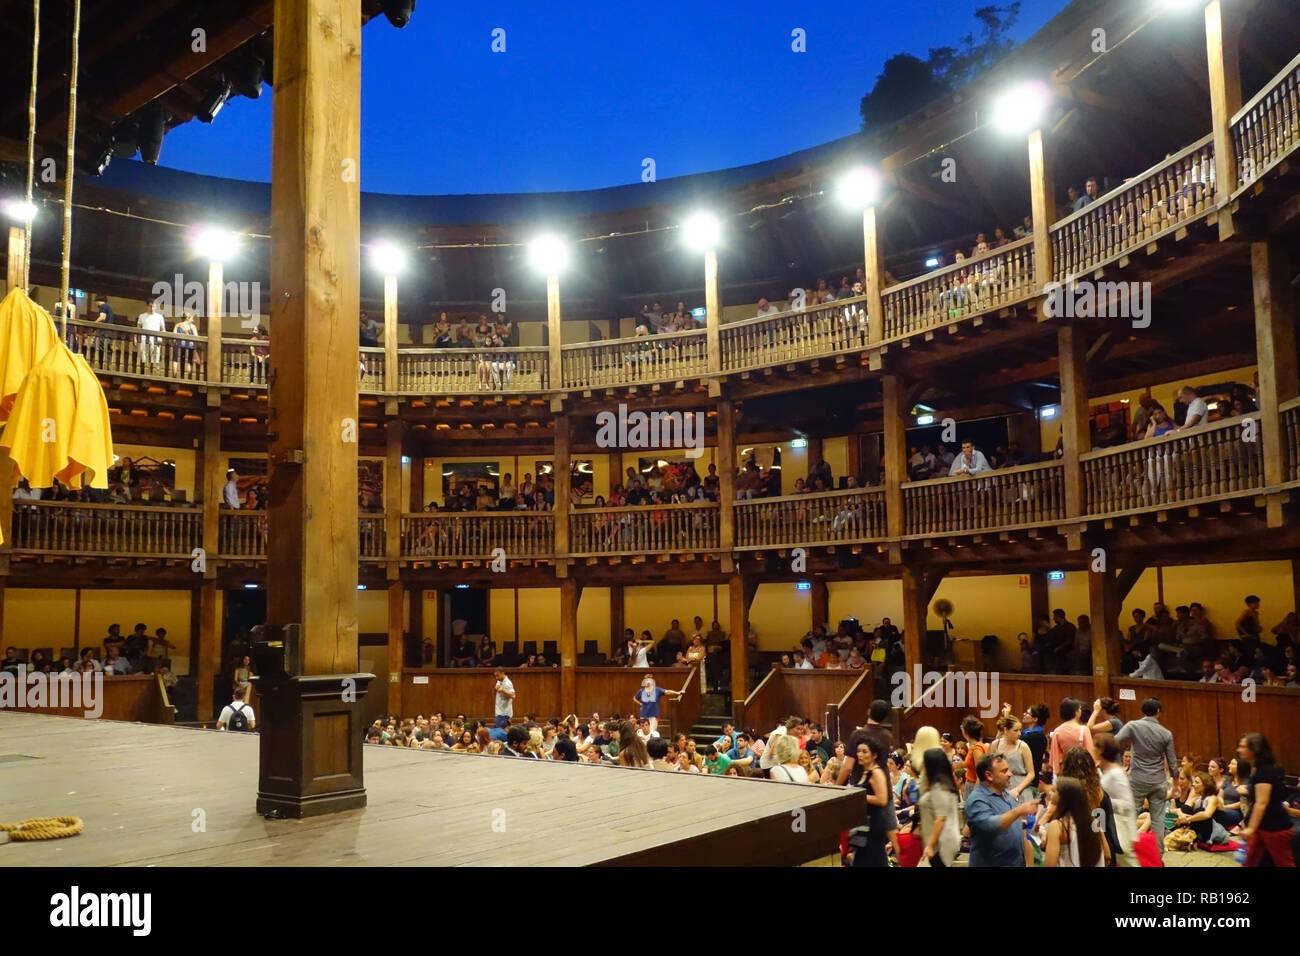 Rome, Italy - July 2014: People in Globe Theatre in Rome waiting for the show to begin Stock Photo